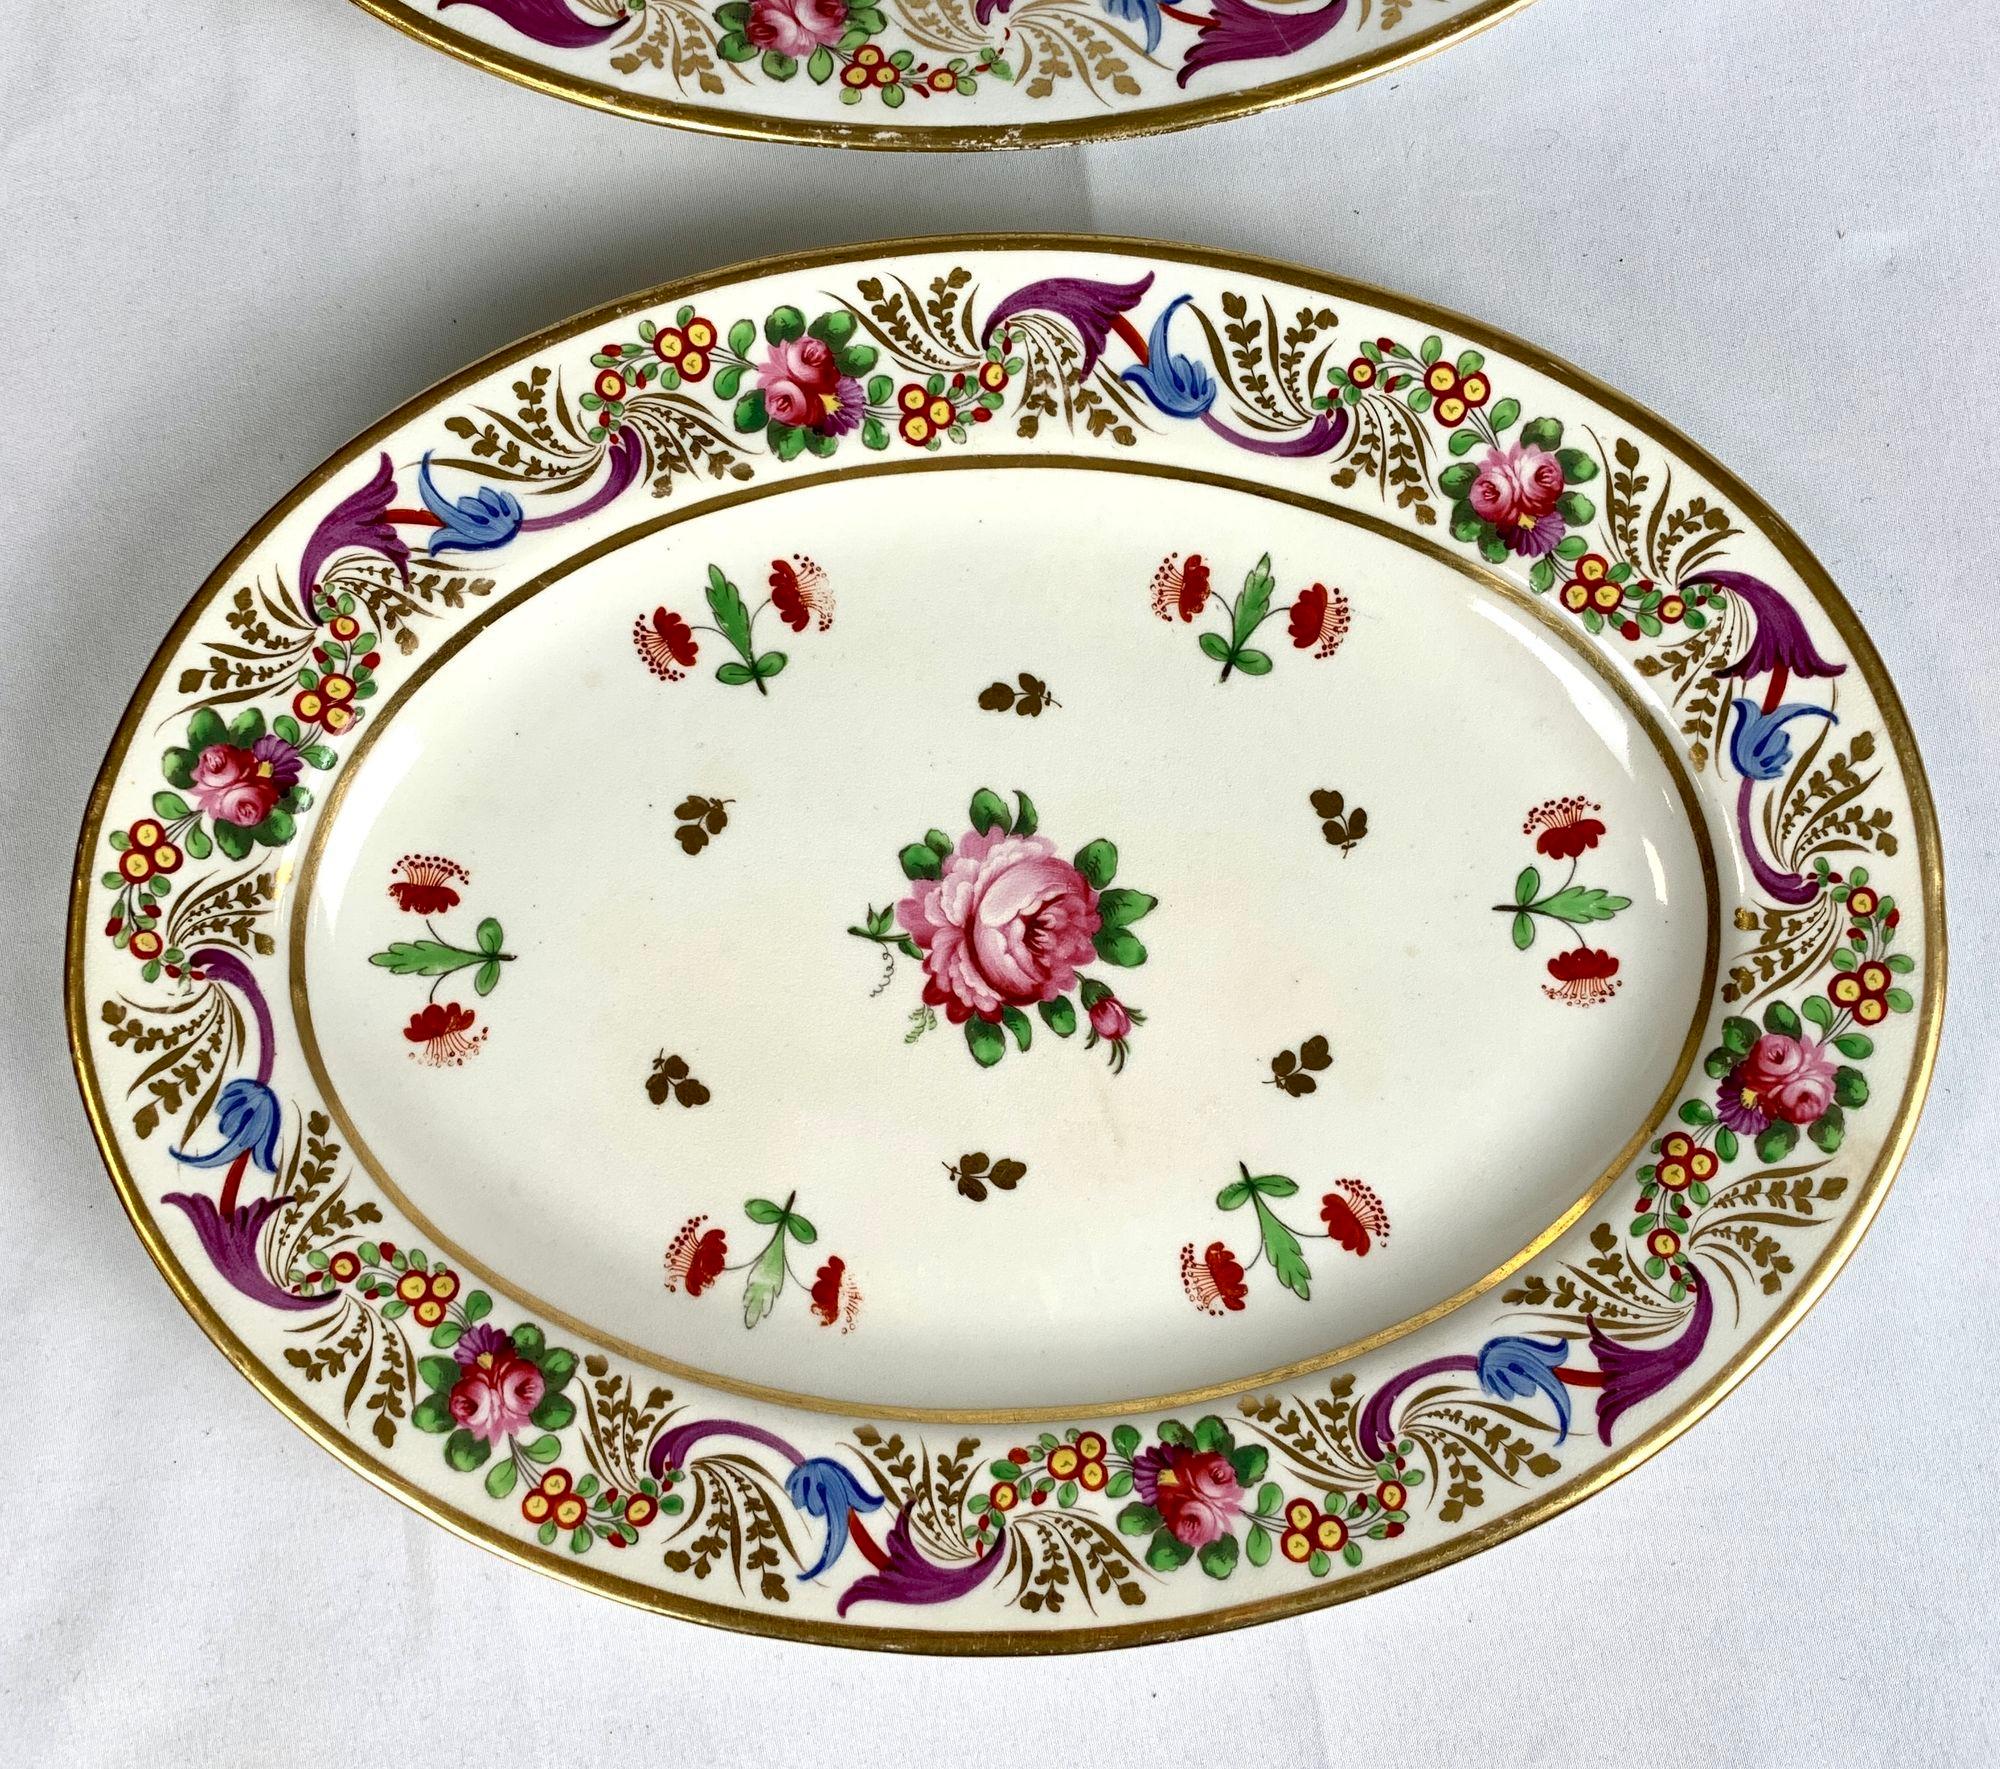 This pair of brightly colored oval dishes are each decorated in the center with an exquisite rose hand painted in pink with green leaves. Around it are six pairs of smaller red flowers, also shown with their green leaves. The lively borders are